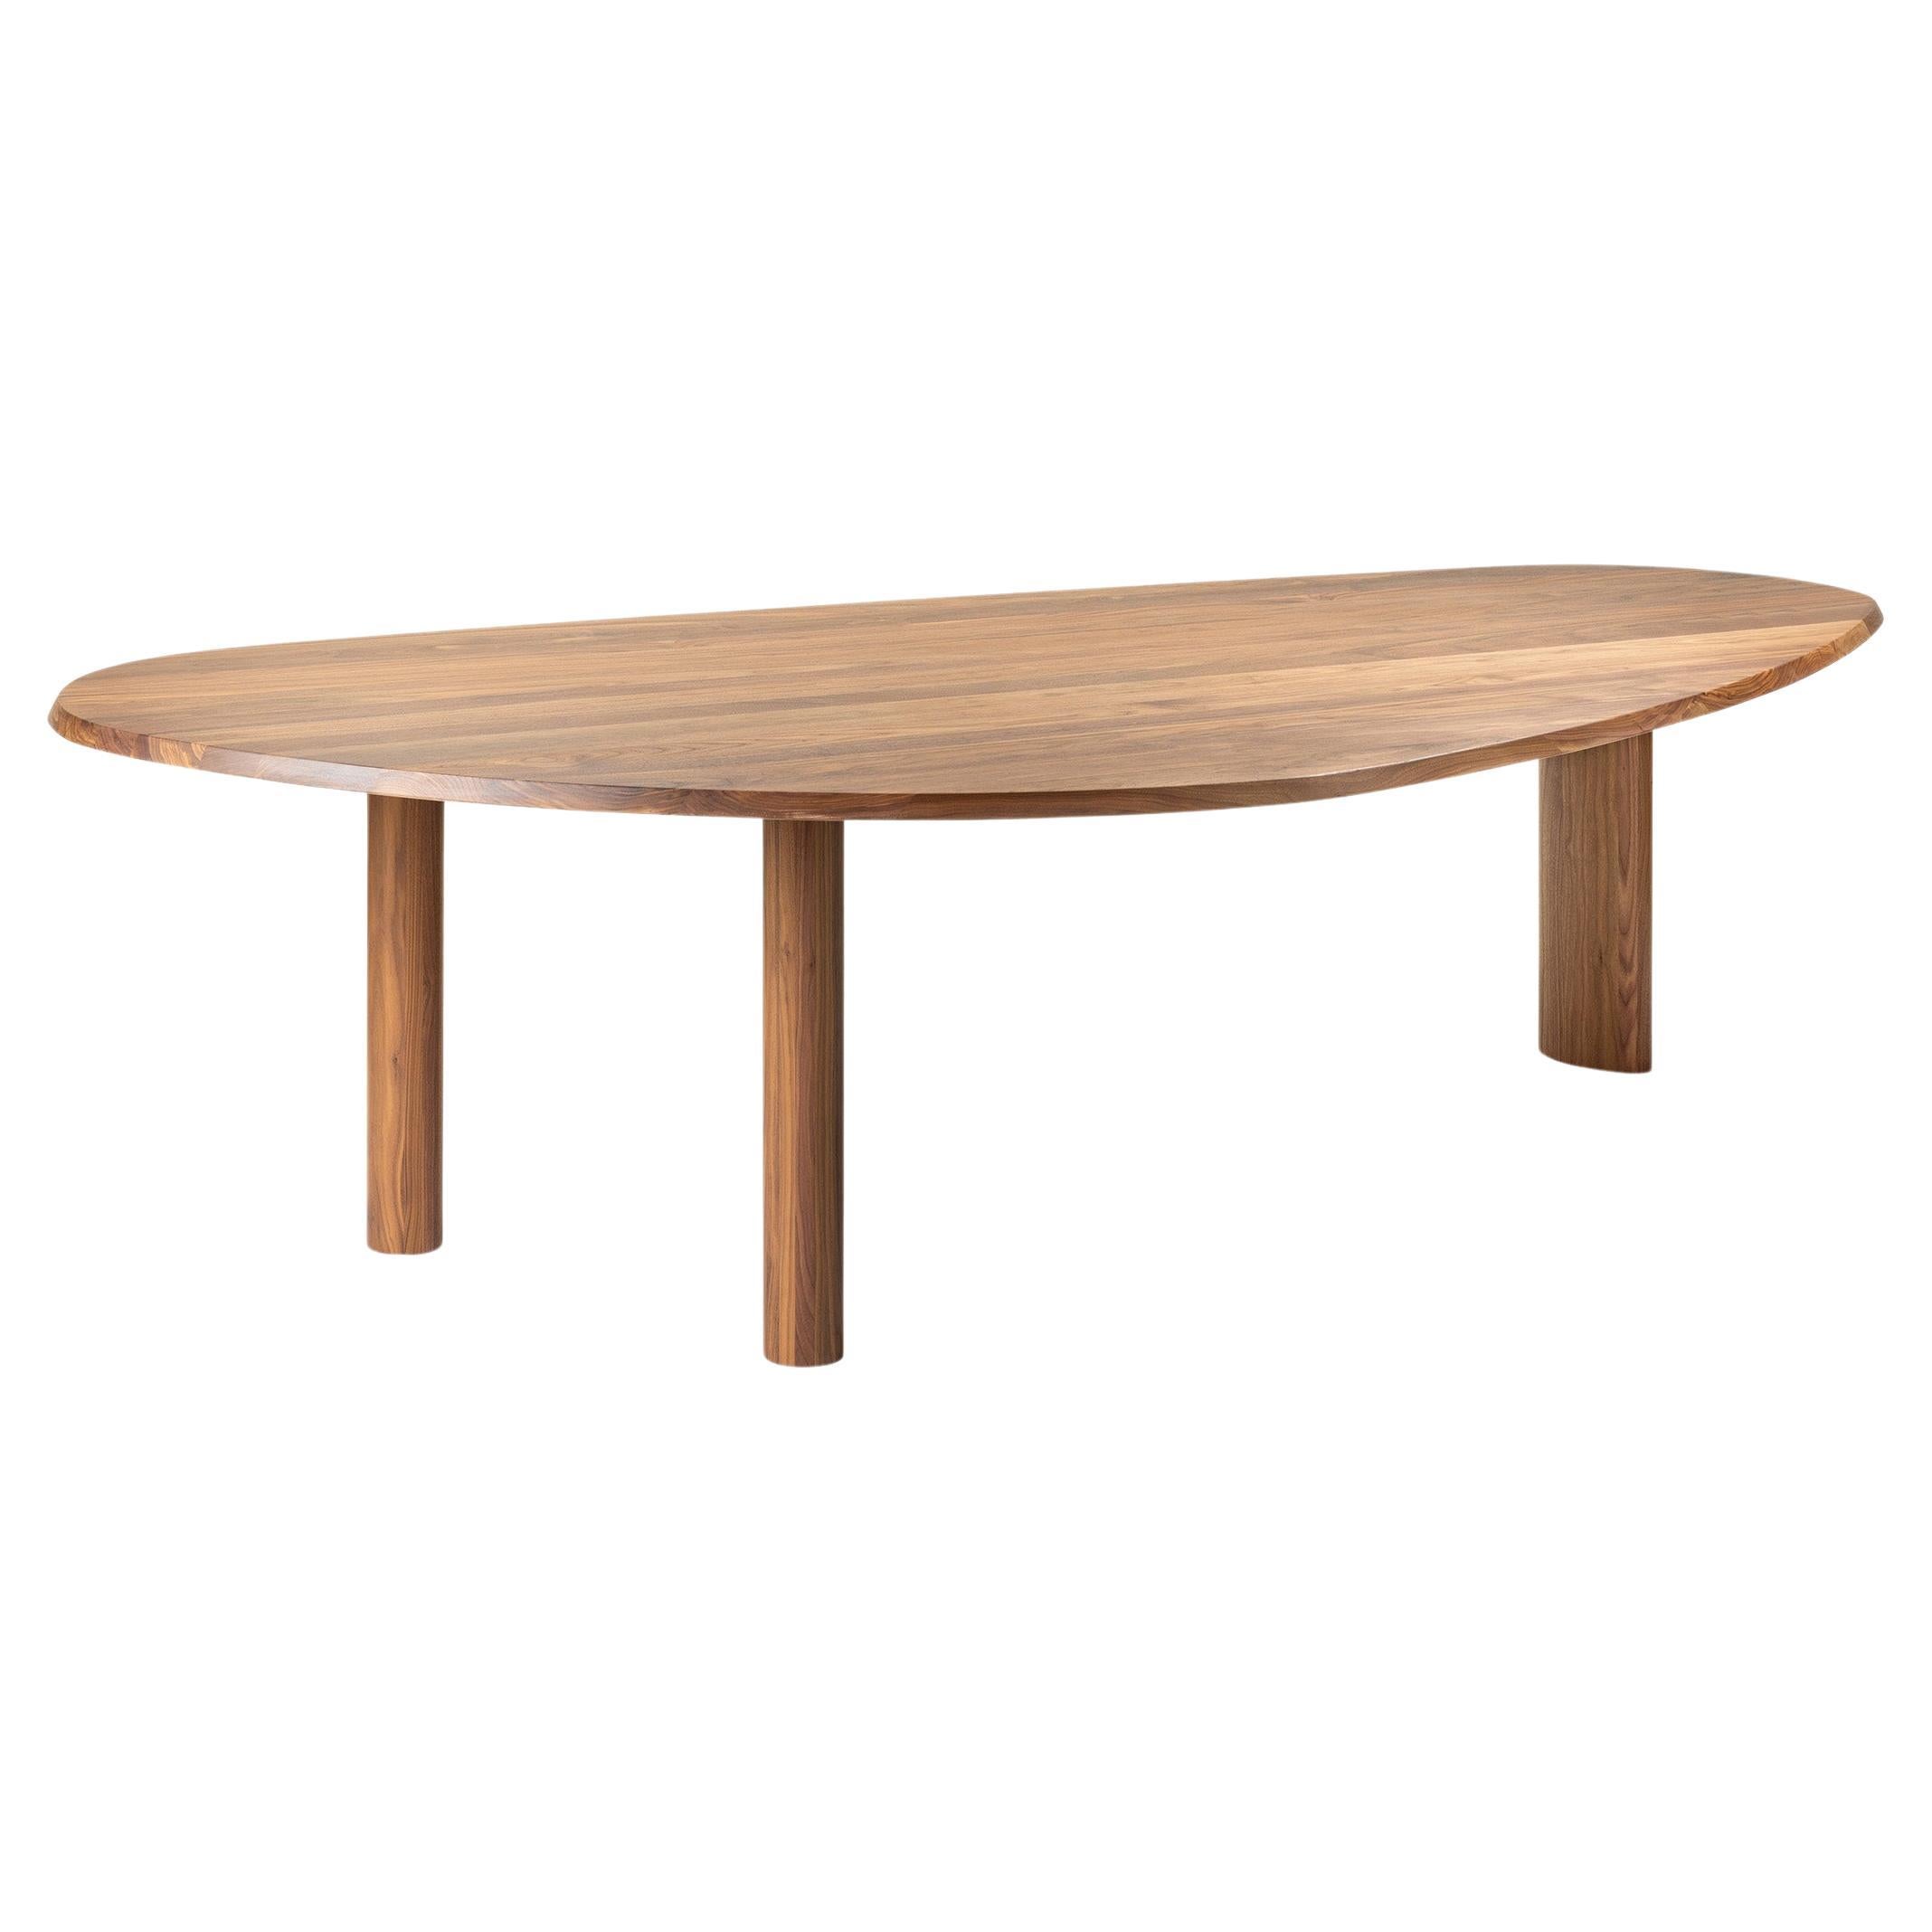 Kluskens Pernette Dining Table For Sale